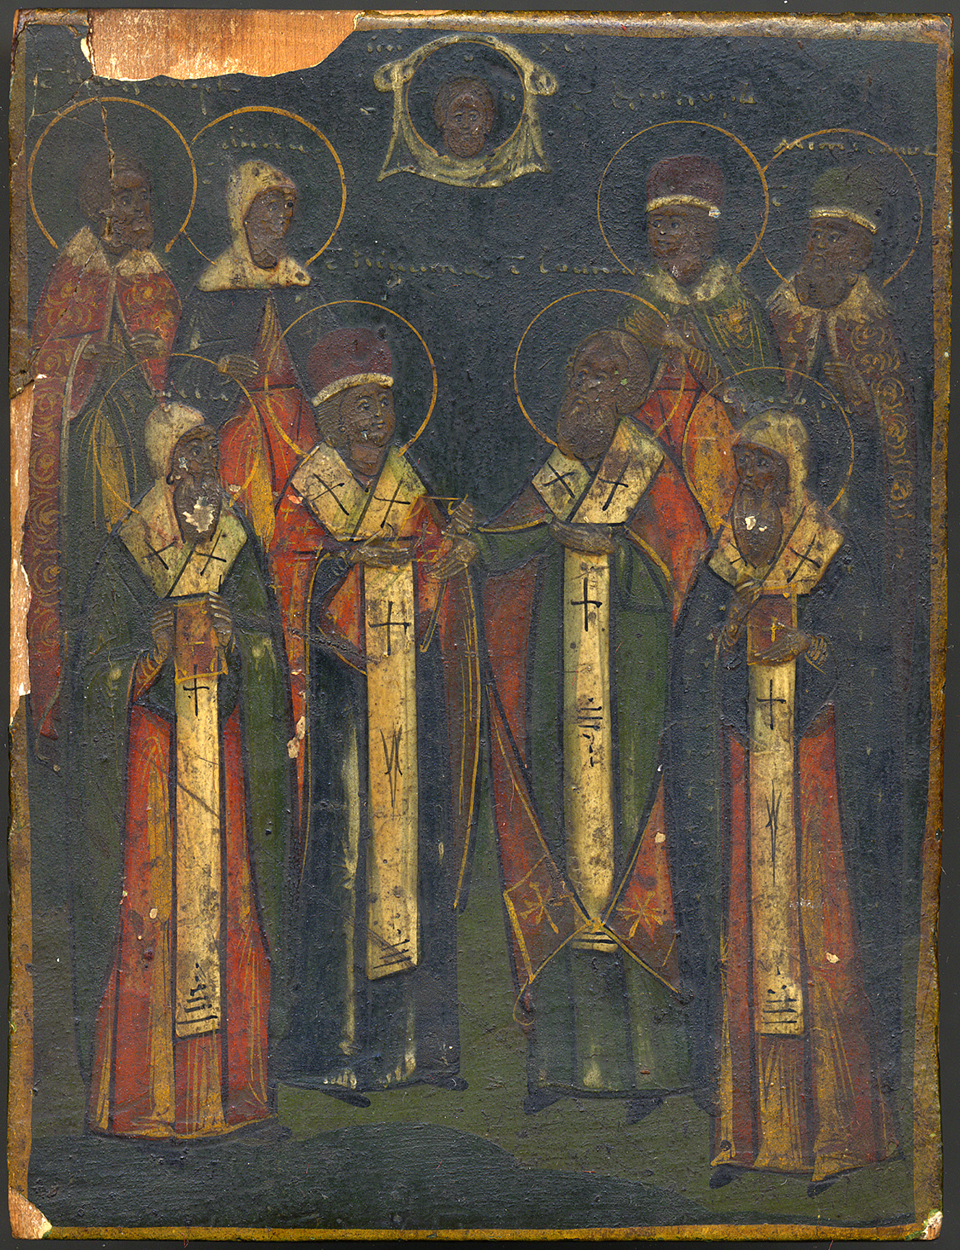 A small Russian icon obtained by Charles A. Longfellow in 1867 in Novgorod, Russia.